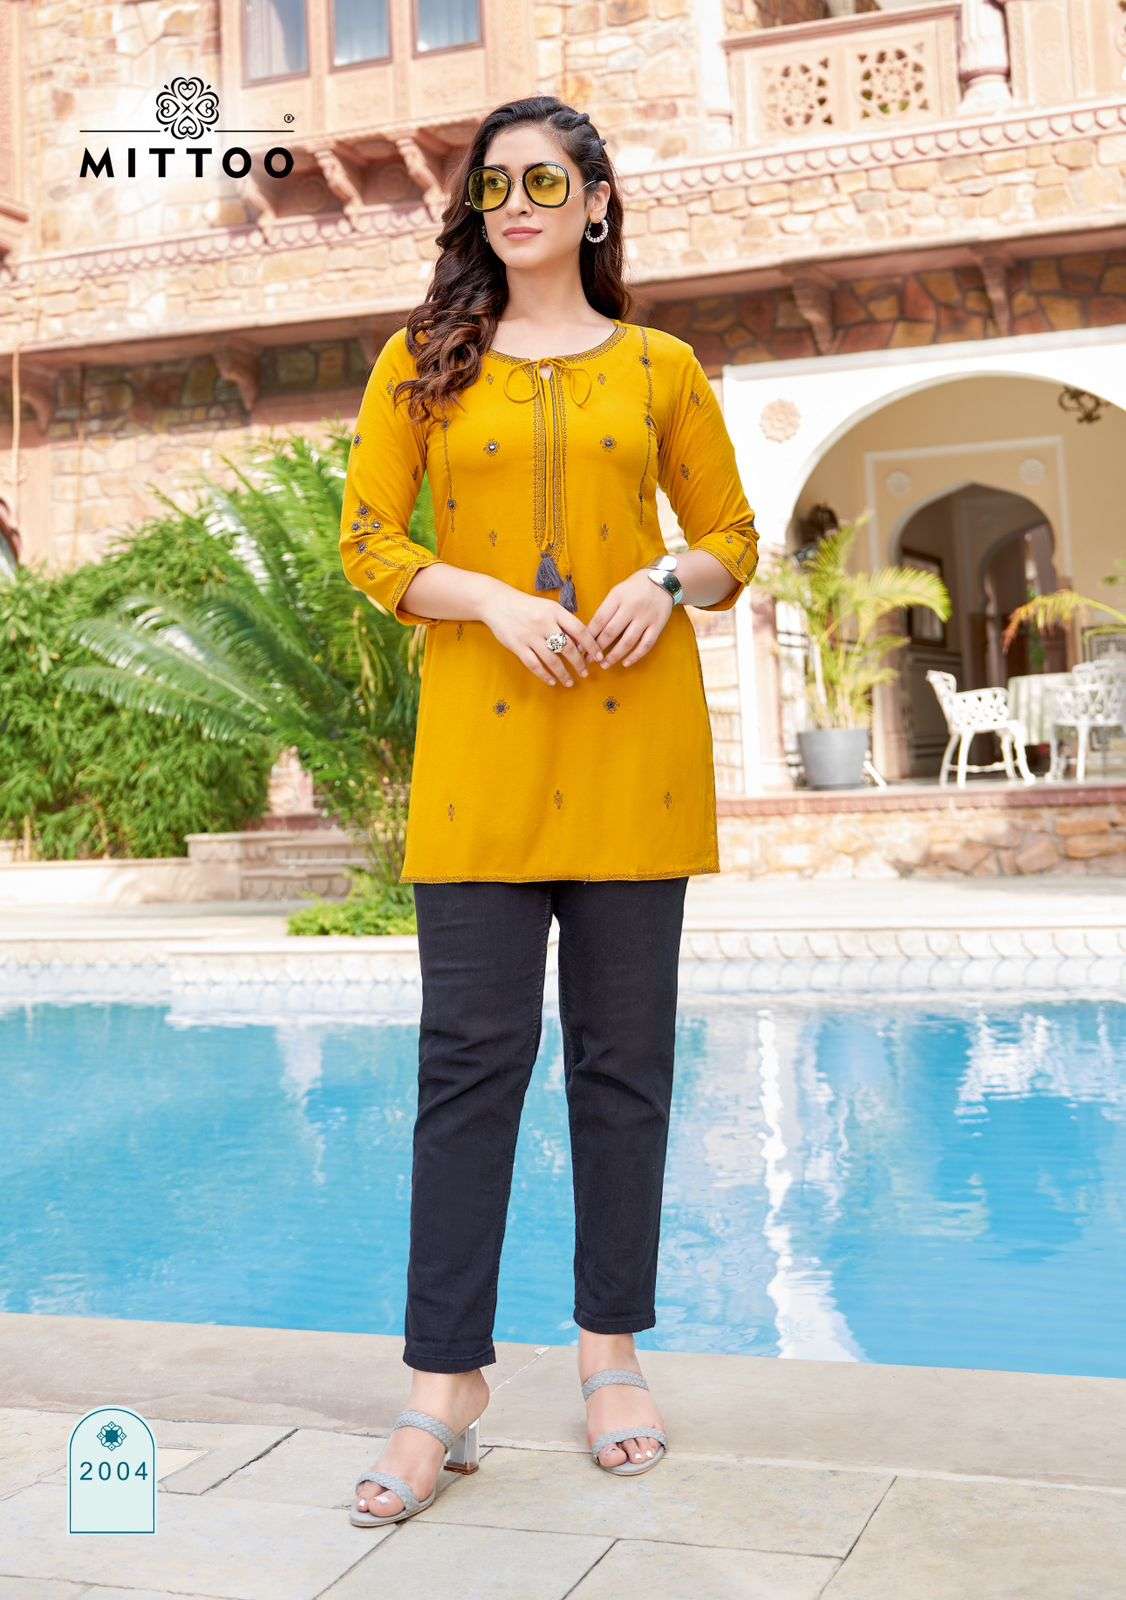 Softy Buy Mittoo Online Wholesaler Latest Collection Tunic Kurtis